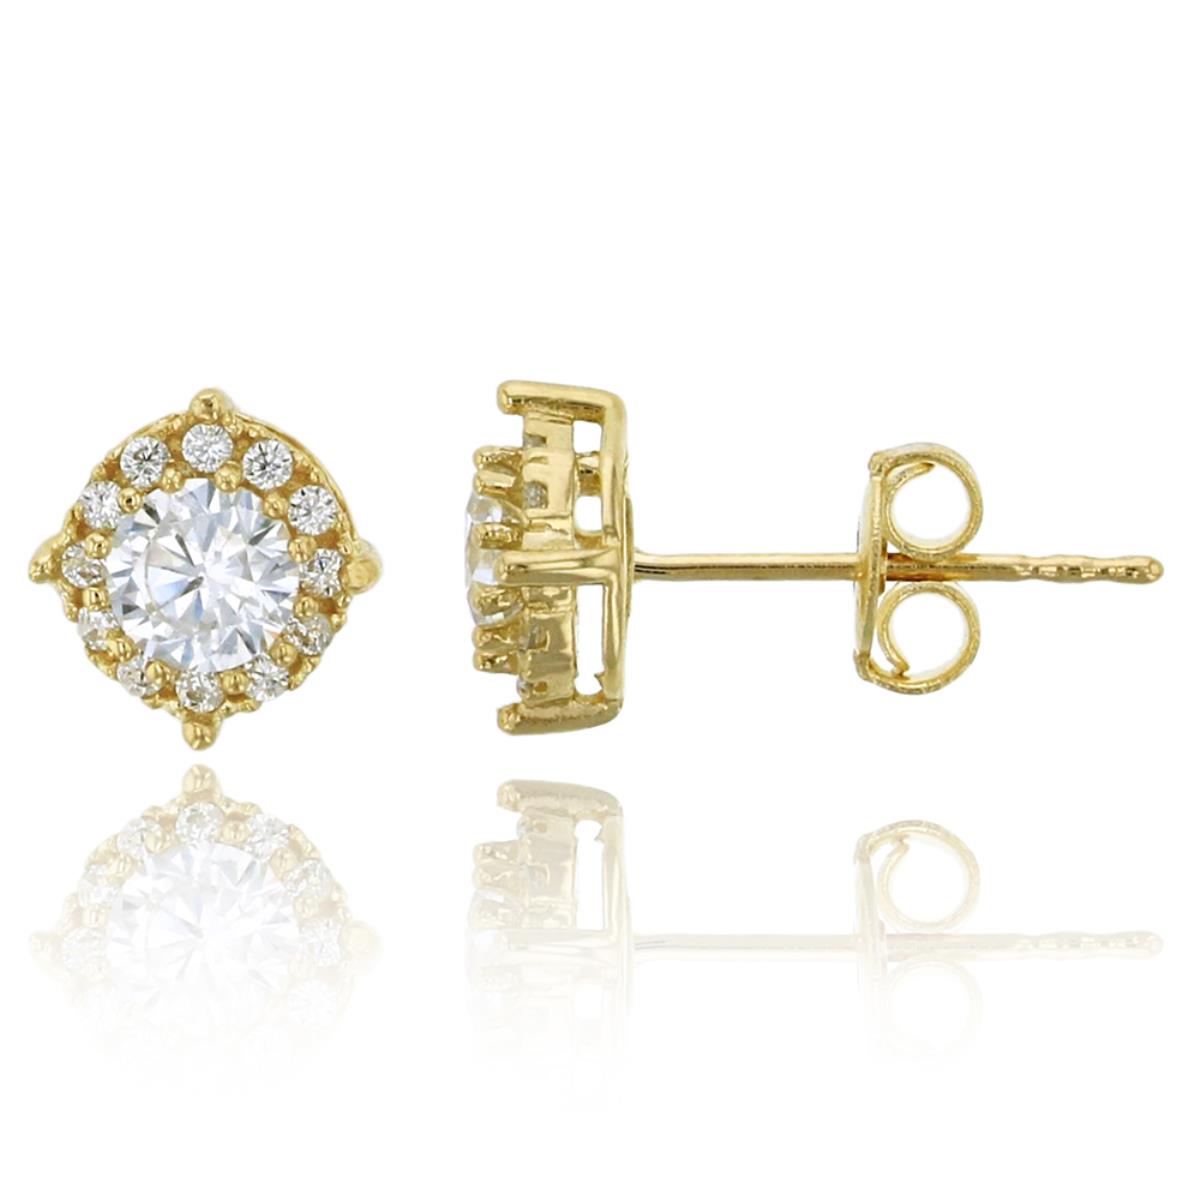 14K Yellow Gold Micropave Round Cut Halo Stud Earrings with Push Backs